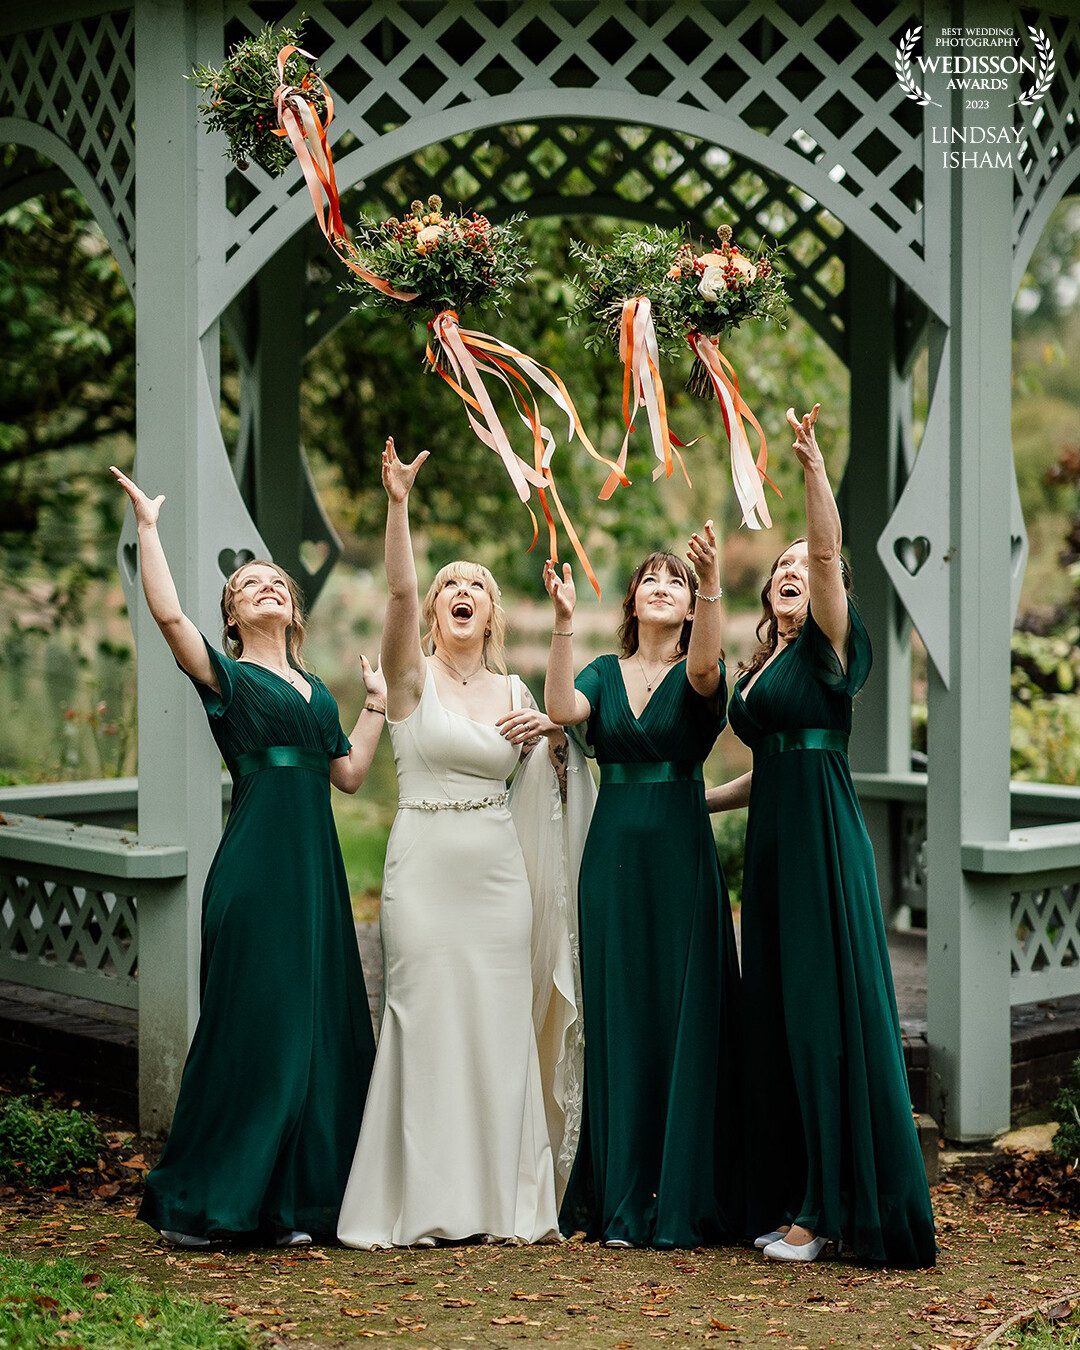 This was such a fun moment to capture!  This bride squad was an absolute dream!!  Another beauty captured at one my favourite venues - Elsham Hall this October.